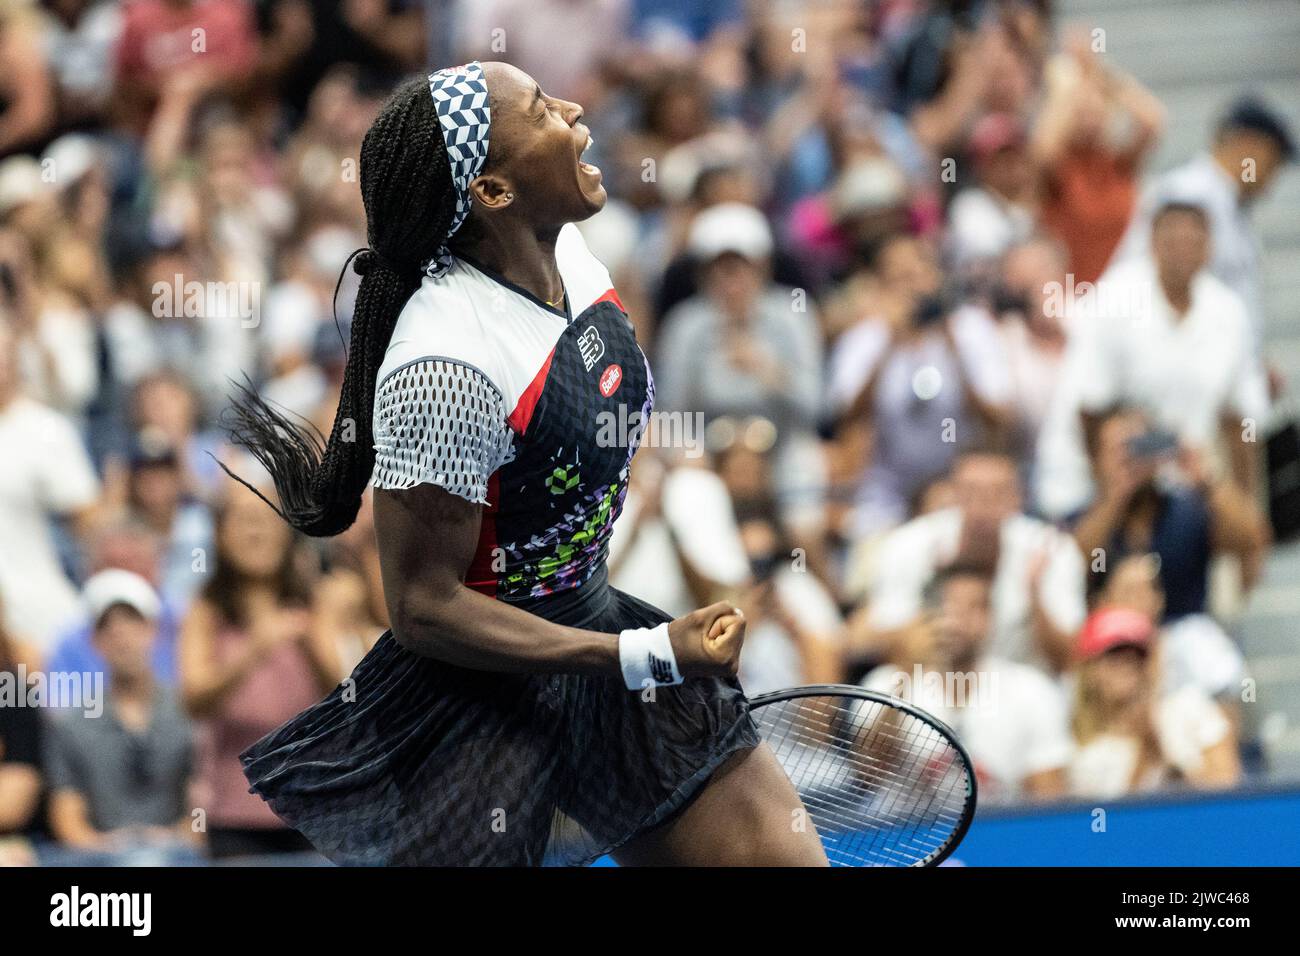 New York, USA. 04th Sep, 2022. Coco Gauff celebrates victory in 4th round of US Open Championships against Shuai Zhang of China at USTA Billie Jean King National Tennis Center in New York on September 4, 2022. Gauff won in straight sets and moved into quarterfinals of the Open for the first time in her career. (Photo by Lev Radin/Spa USA) Credit: Sipa USA/Alamy Live News Stock Photo